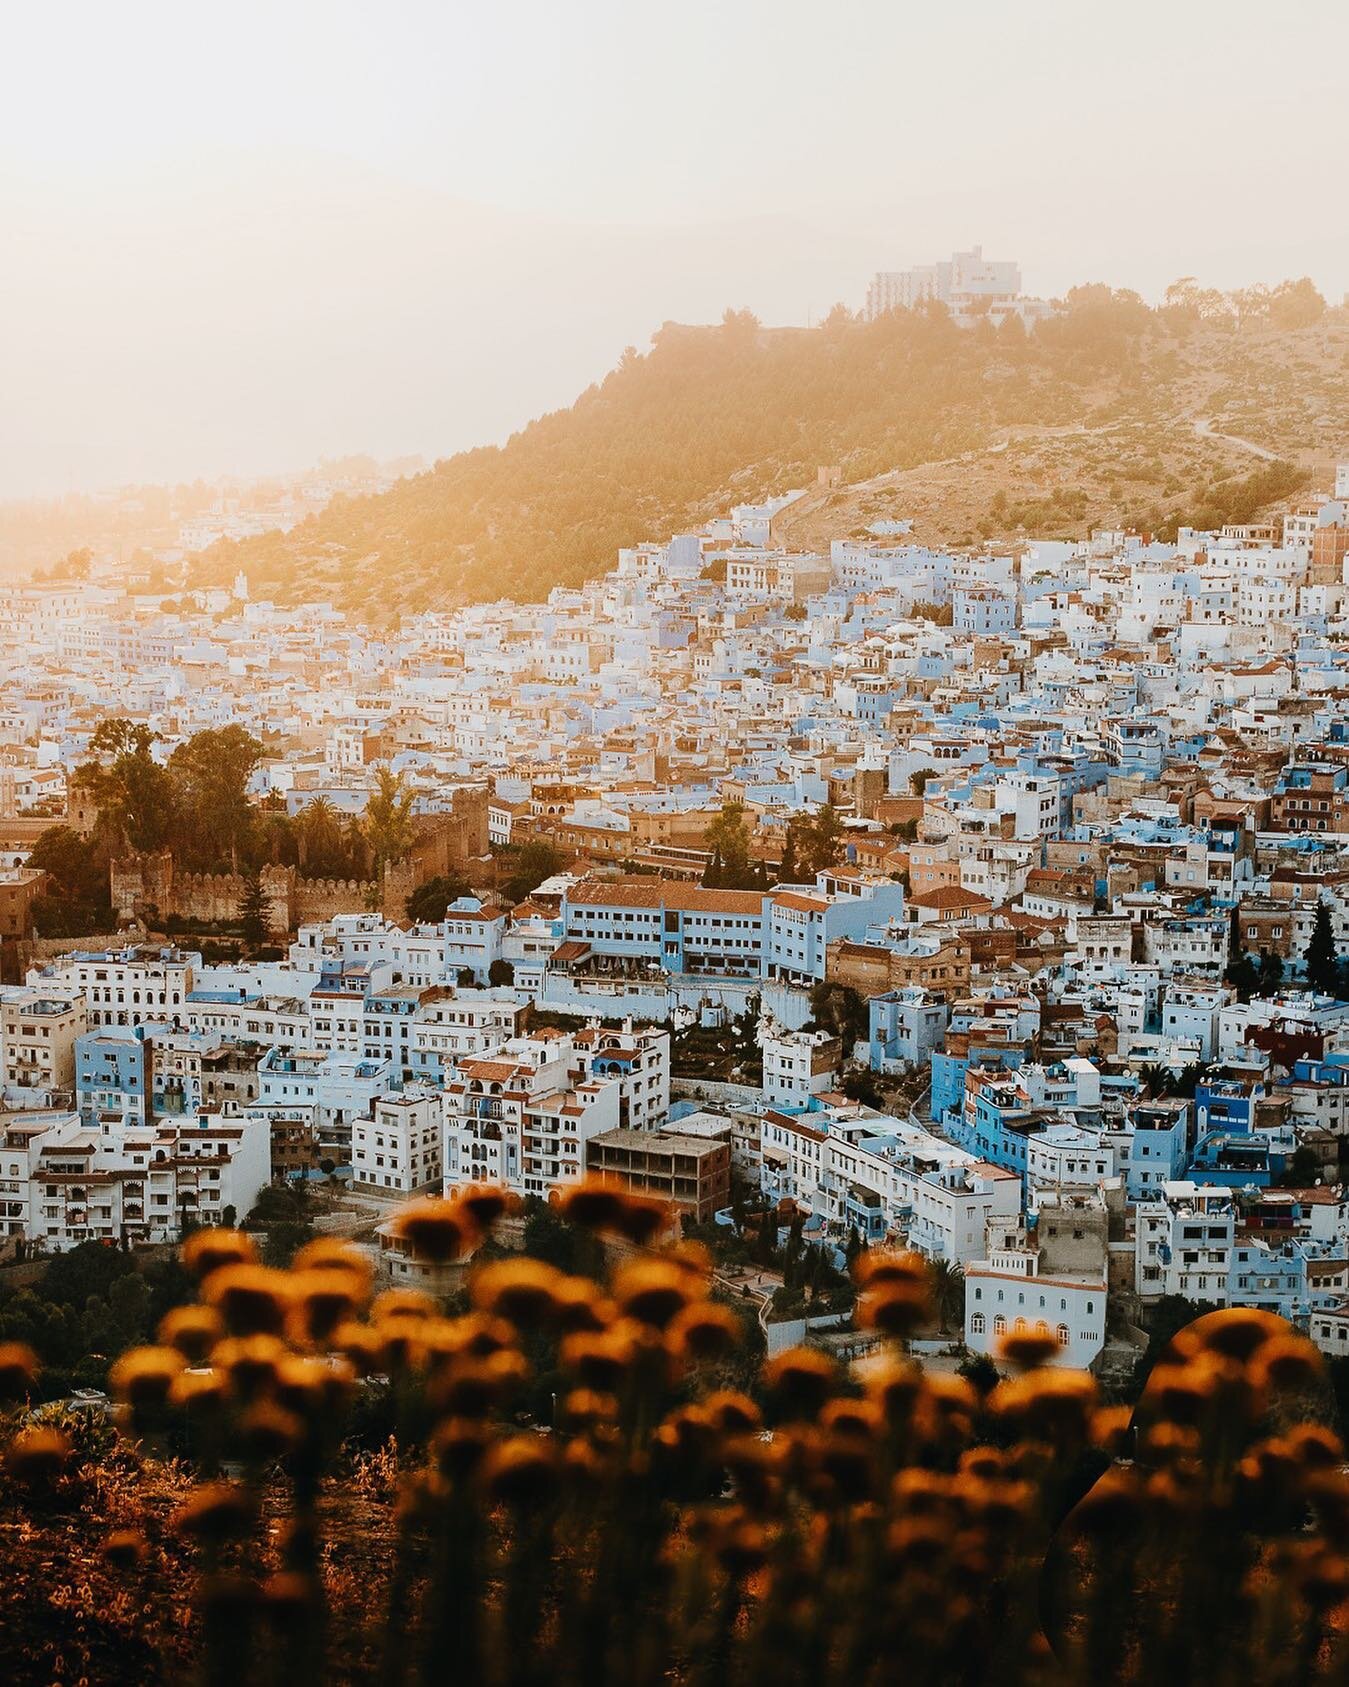 The blue pearl: Chefchaouen 💙

Looking back on old trips and hard drives full of photos, we stumbled across this epic sunset while on commission for @intrepidtravel (you know, when we could actually work 😂).

It used to be moments like these that m